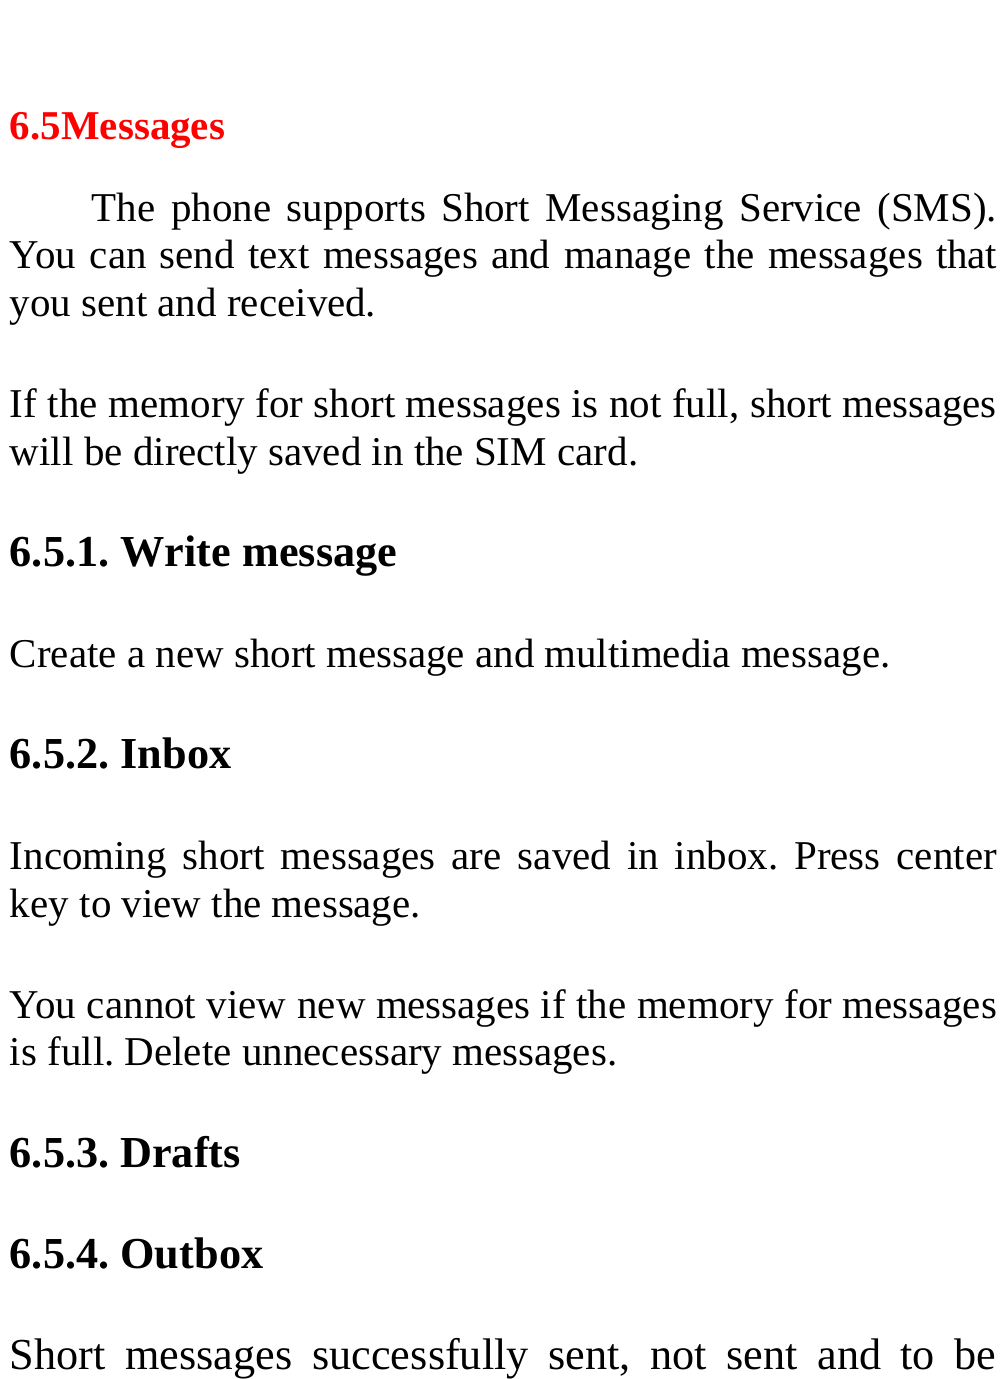   6.5Messages The phone supports Short Messaging Service (SMS). You can send text messages and manage the messages that you sent and received. If the memory for short messages is not full, short messages will be directly saved in the SIM card.   6.5.1. Write message Create a new short message and multimedia message. 6.5.2. Inbox Incoming short messages are saved in inbox. Press center key to view the message. You cannot view new messages if the memory for messages is full. Delete unnecessary messages. 6.5.3. Drafts 6.5.4. Outbox   Short messages successfully sent, not sent and to be 